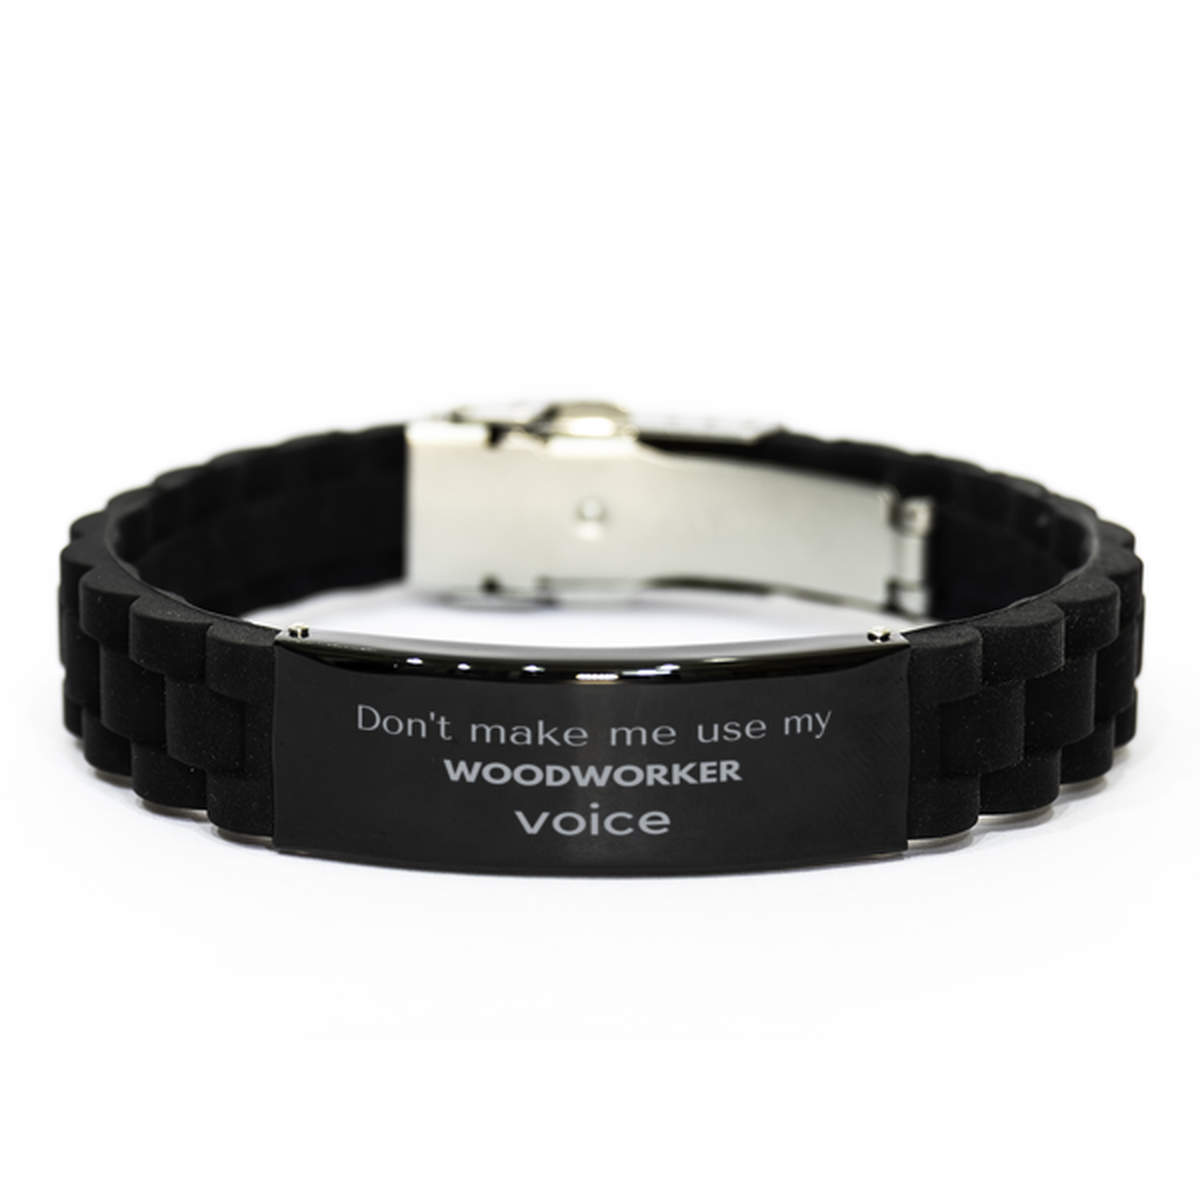 Don't make me use my Woodworker voice, Sarcasm Woodworker Gifts, Christmas Woodworker Black Glidelock Clasp Bracelet Birthday Unique Gifts For Woodworker Coworkers, Men, Women, Colleague, Friends